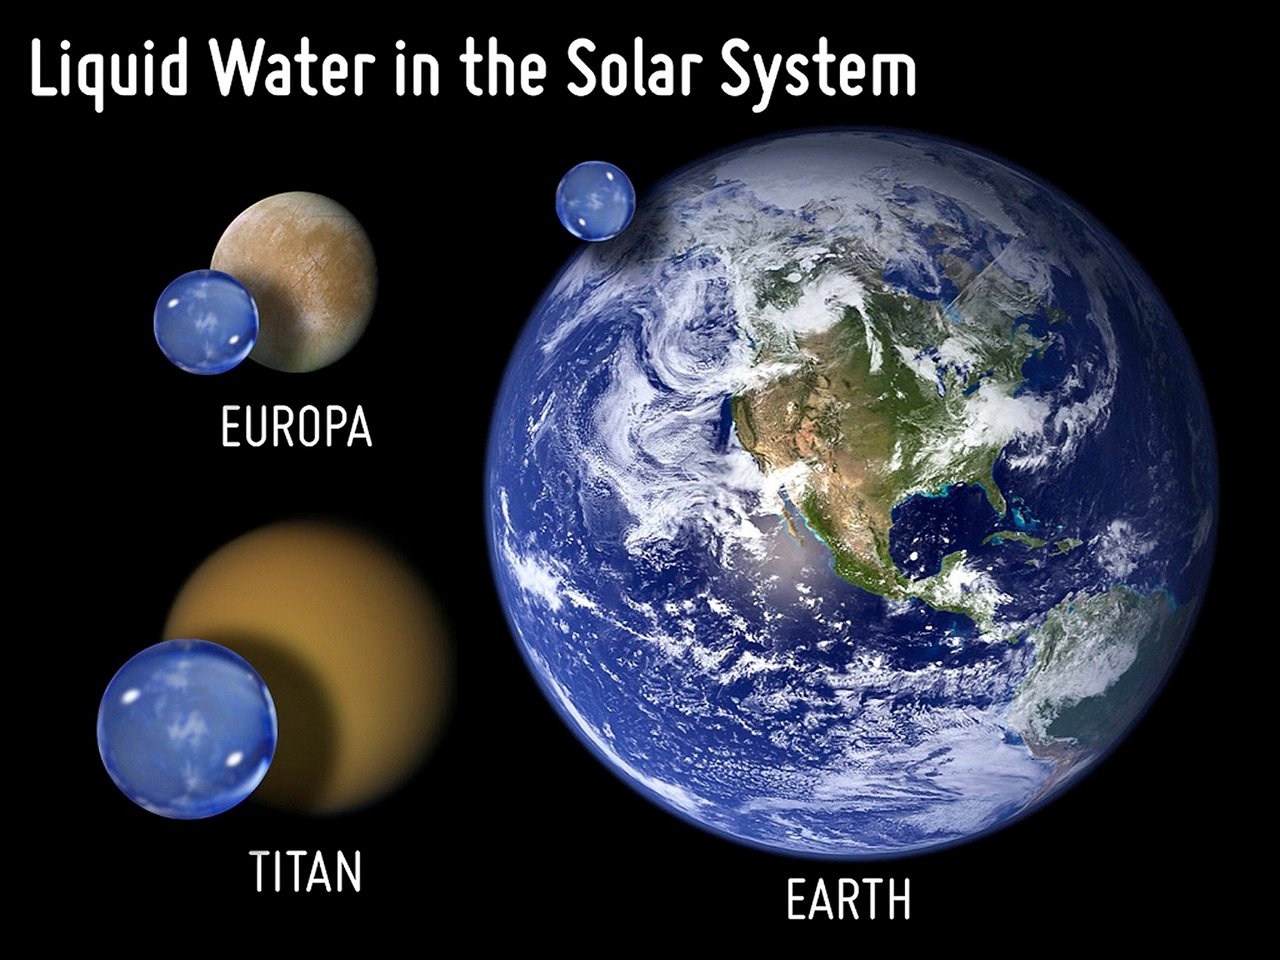 Liquid water in the Solar System